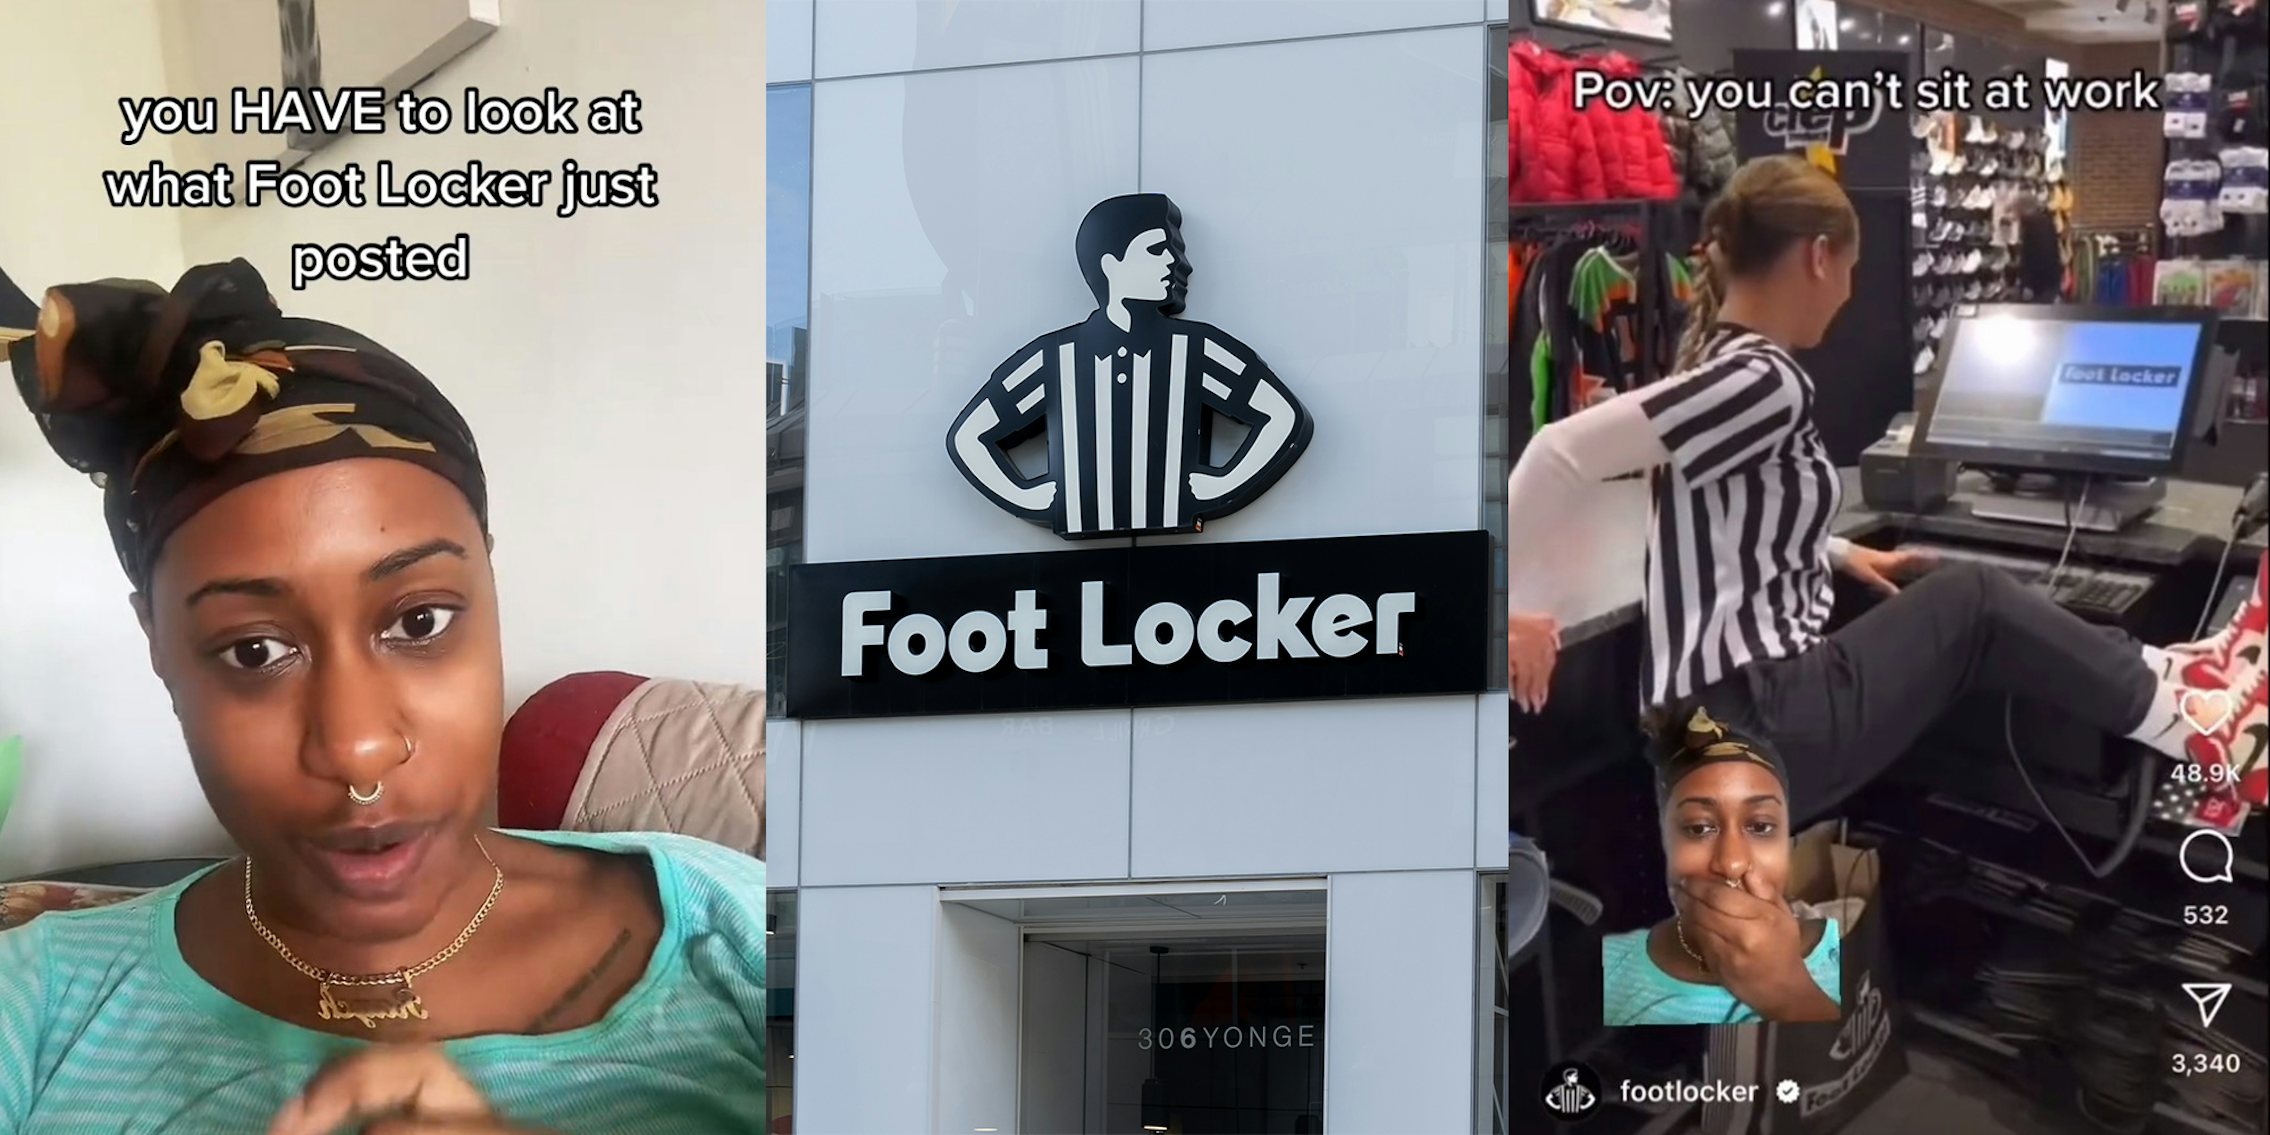 Foot Locker Criticized for Reposting Video About Workers Not Sitting